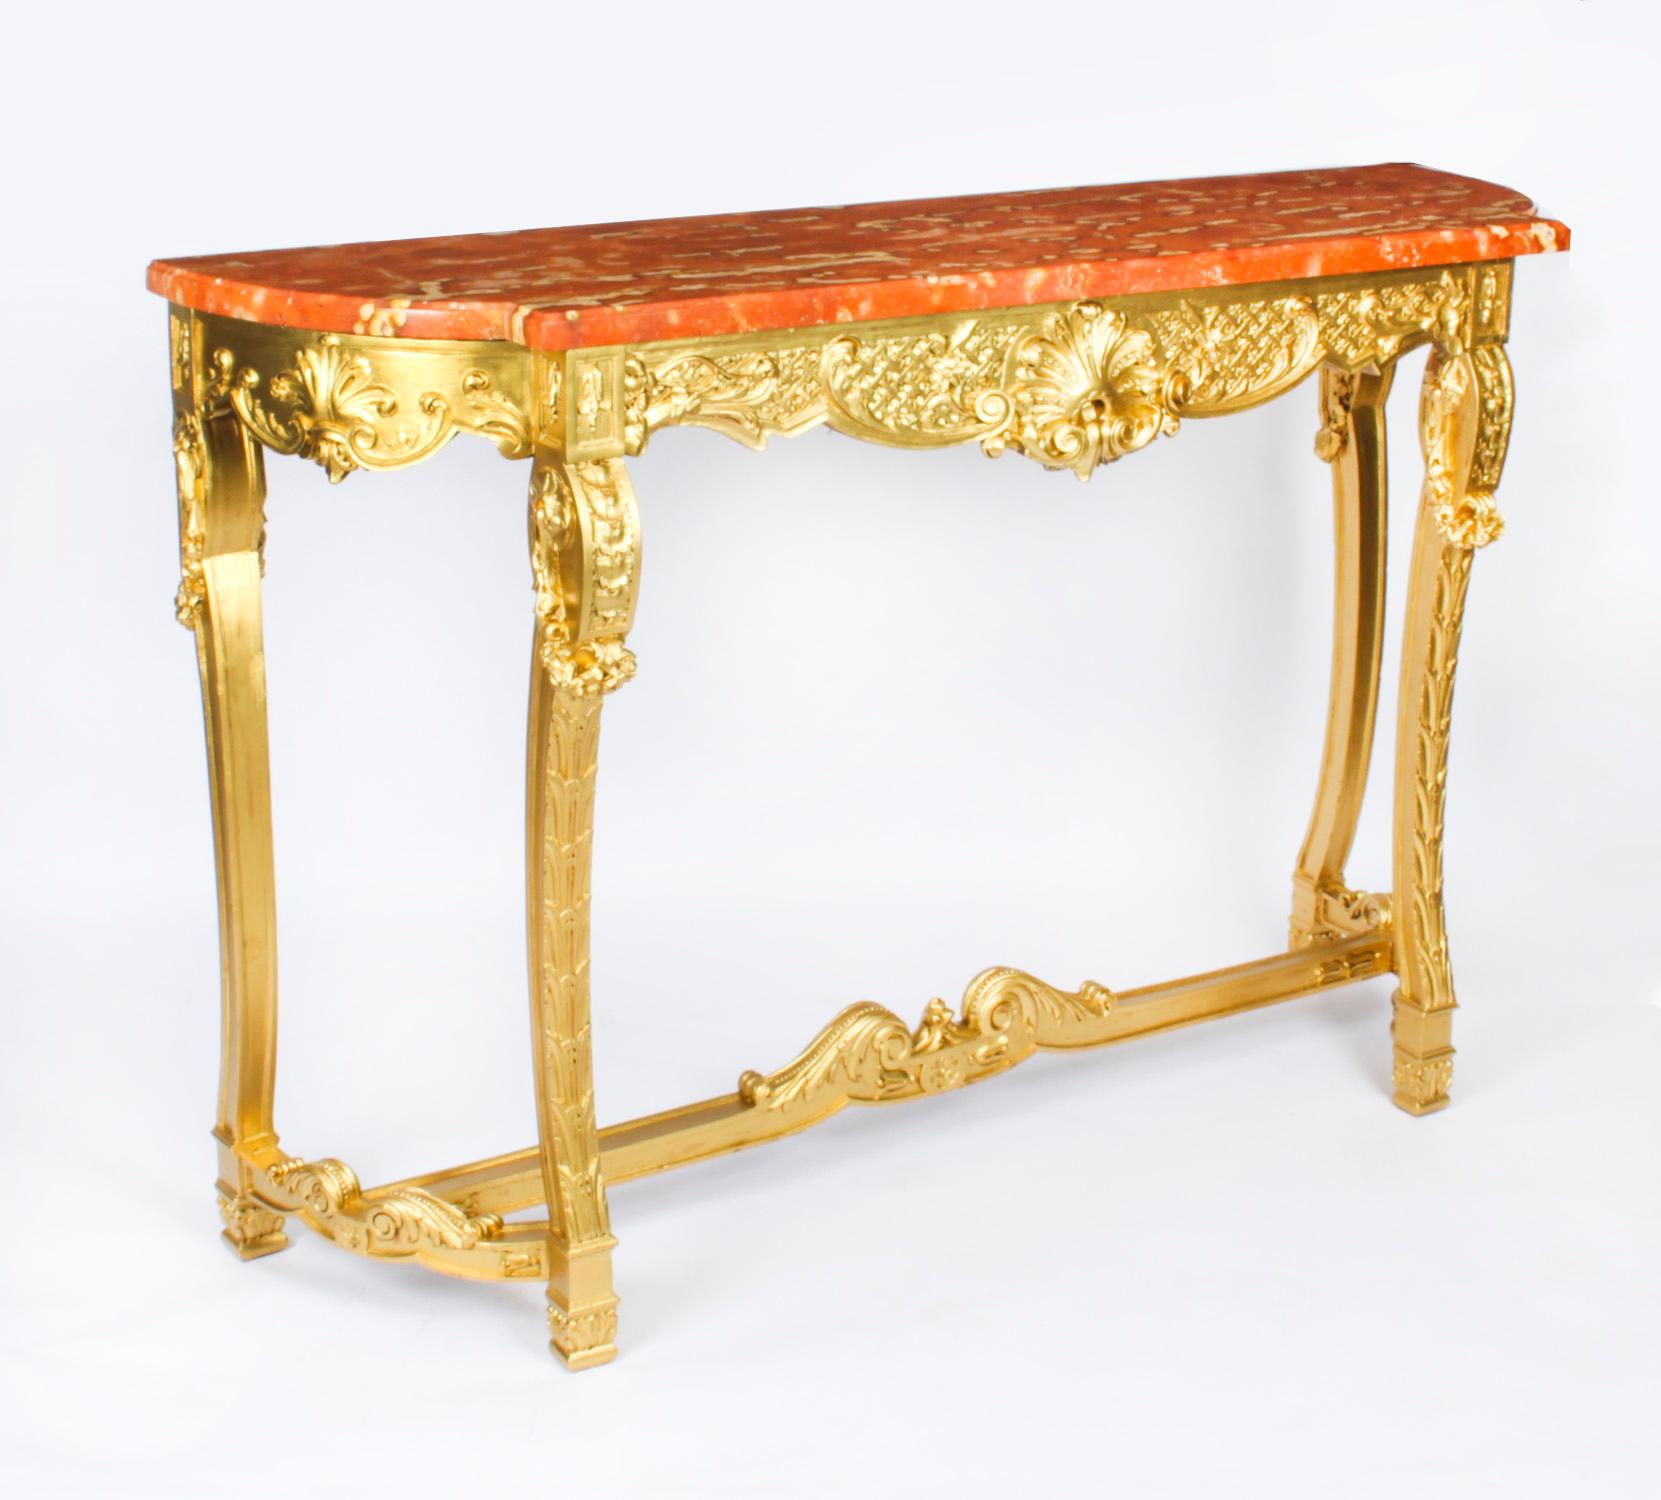 This is an monumental fine and elegant French Louis XVIII carved giltwood console table with matching Trumeau mirror, circa 1820 in date.

The beautifully carved giltwood marble topped console, has a shaped marble top over a conforming carved